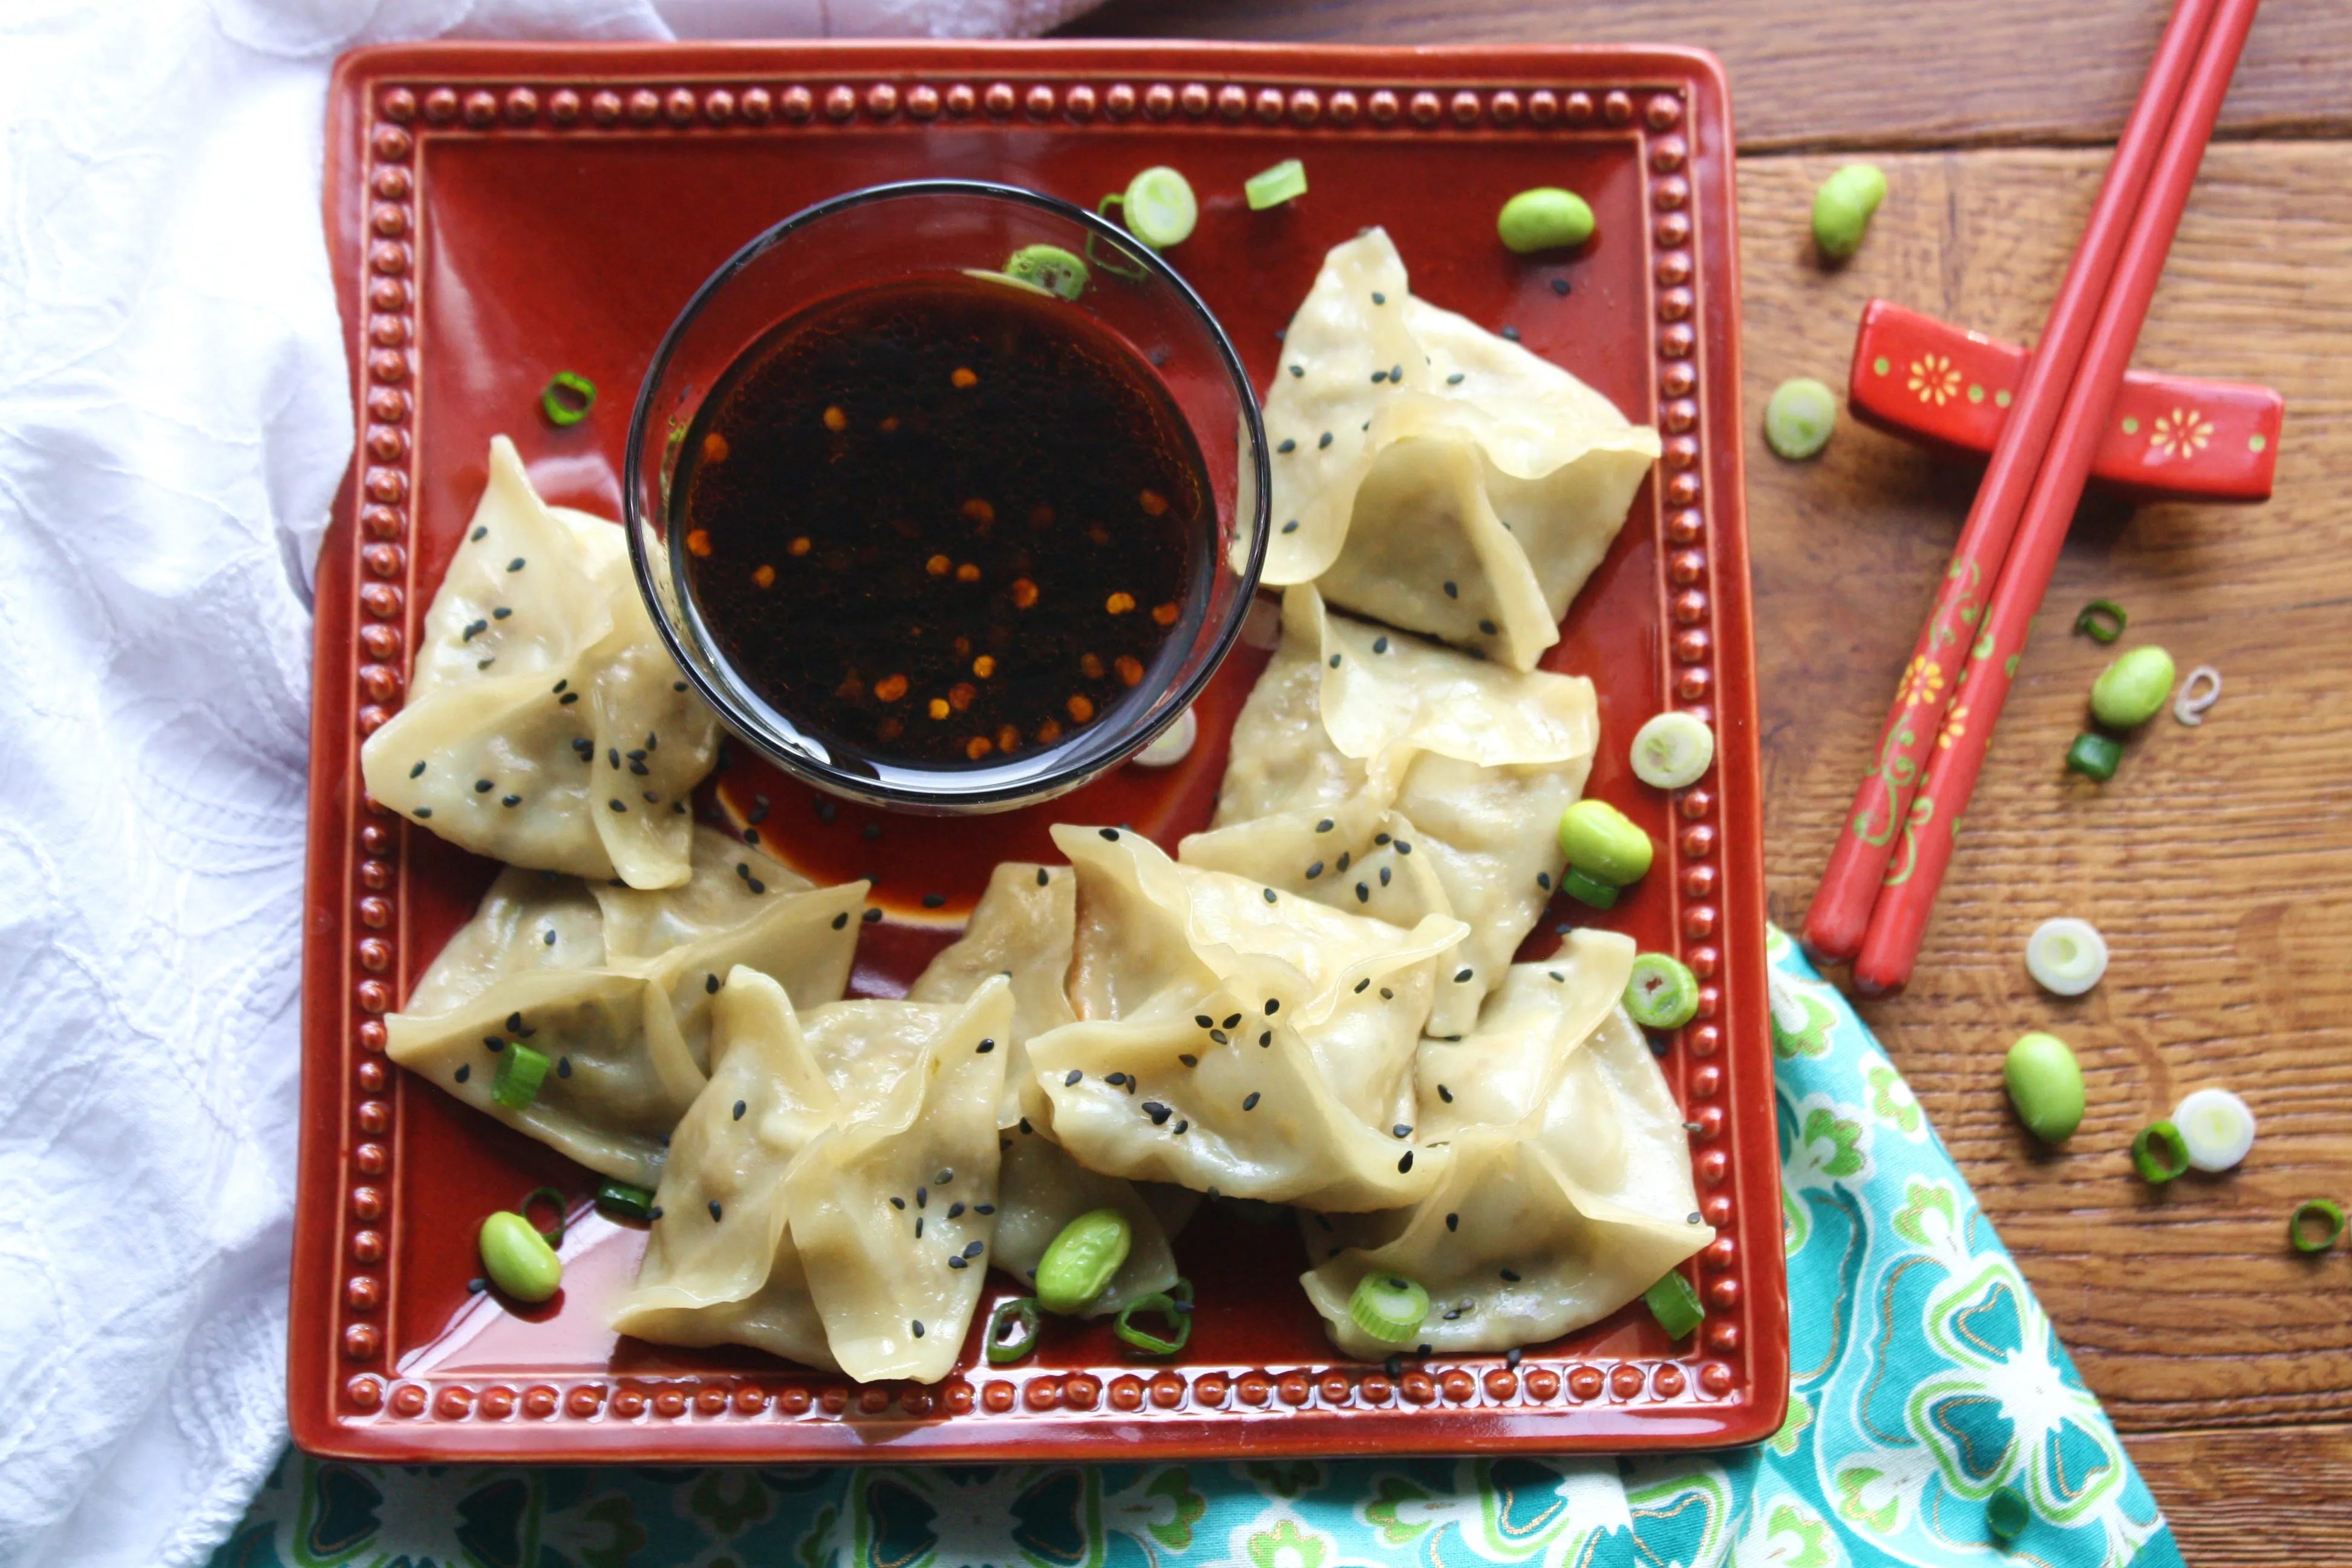 Edamame and Mushroom Potstickers with Dipping Sauce make a yummy snack. You'll love these potstickers with they're tasty dipping sauce!